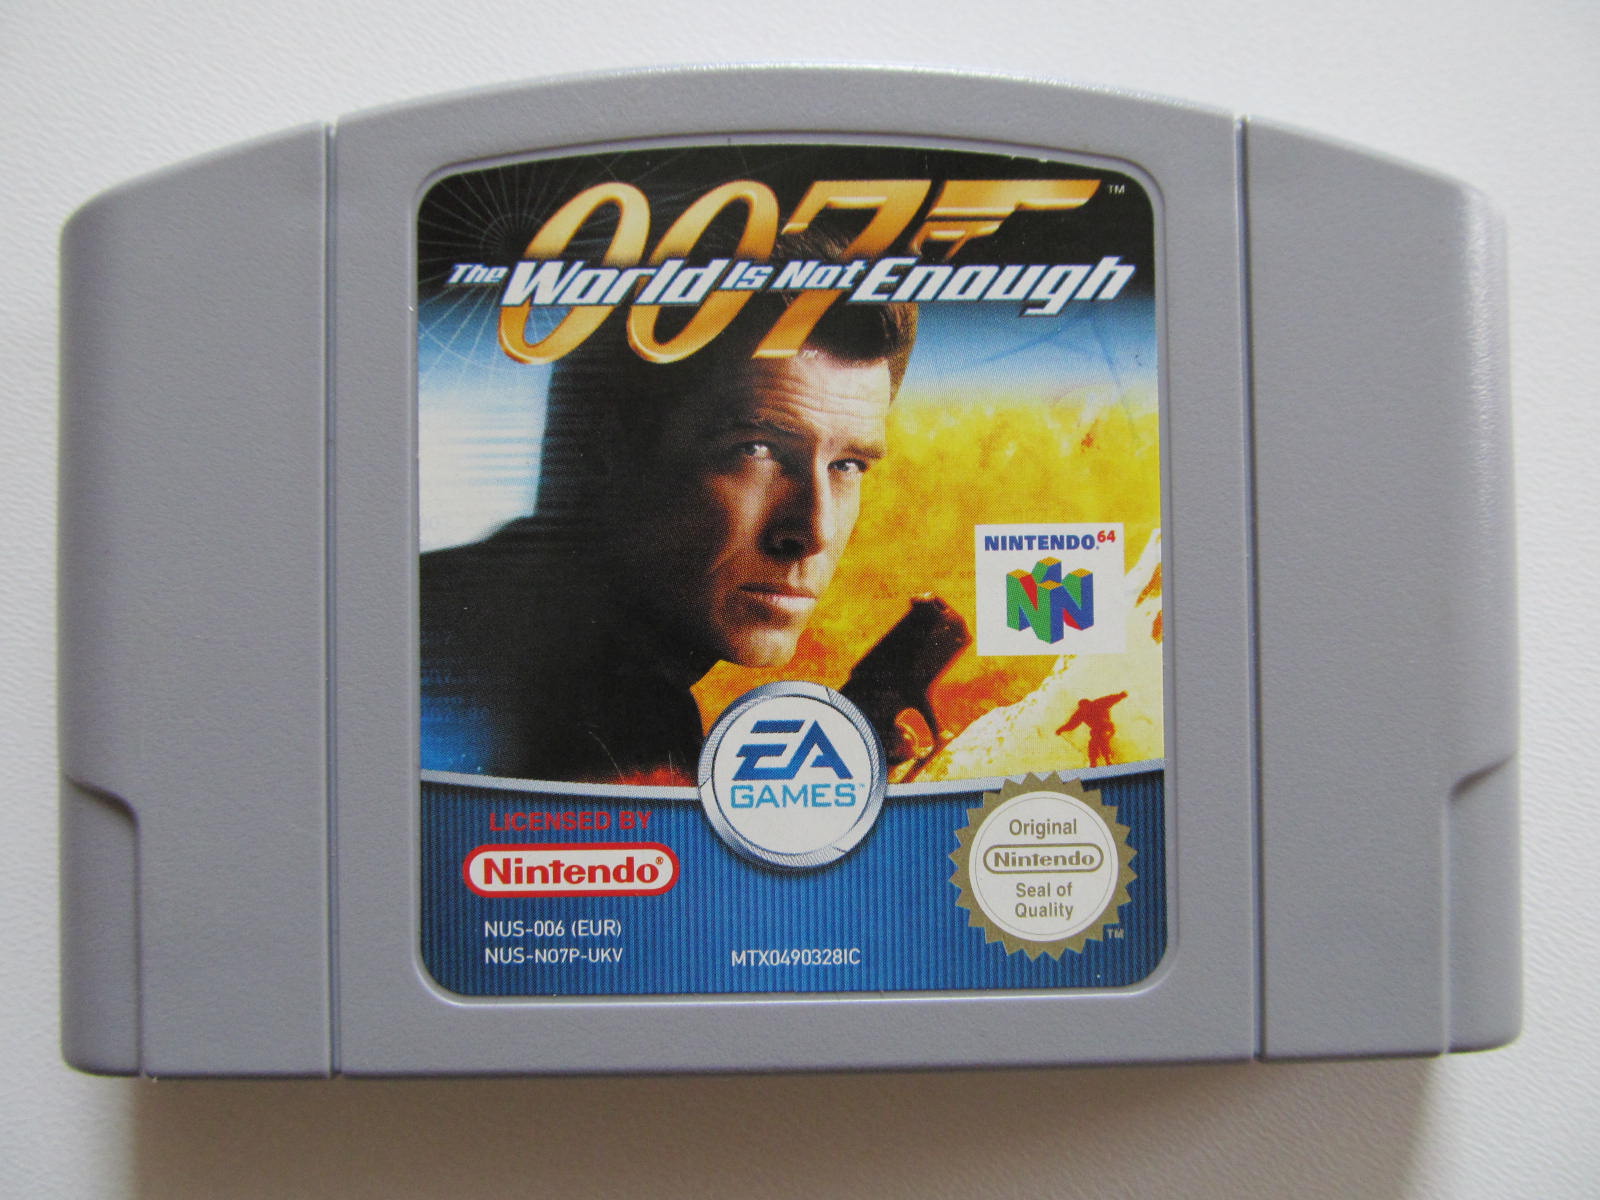 007 - The World is not Enough